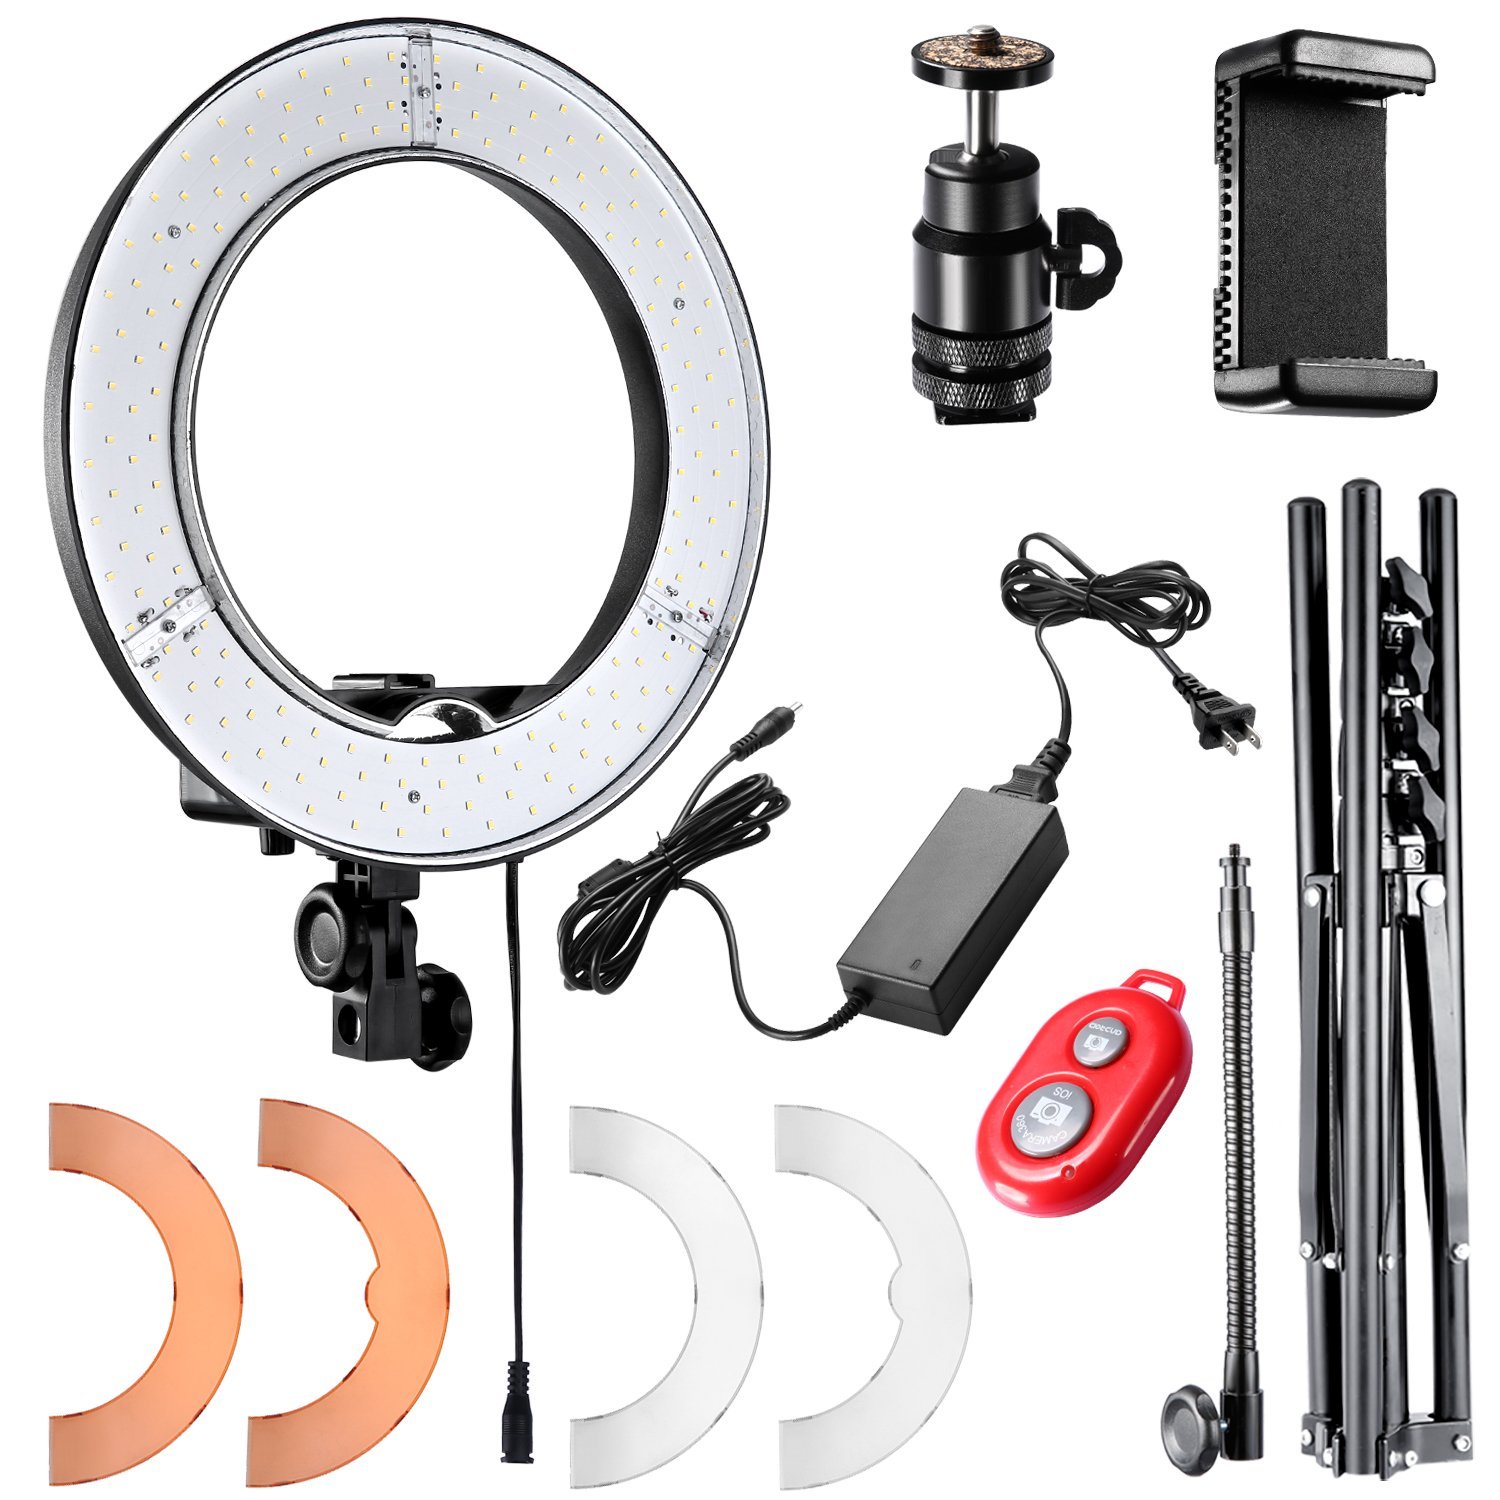 Diffuser Neewer 14 inches 36W LED 5500K Dimmable Ring Light Kit: SMD Ring Light Portrait and Photography Phone Holder for Video Ball Head Hot Shoe Adapter 45-102 inches Light Stand Makeup